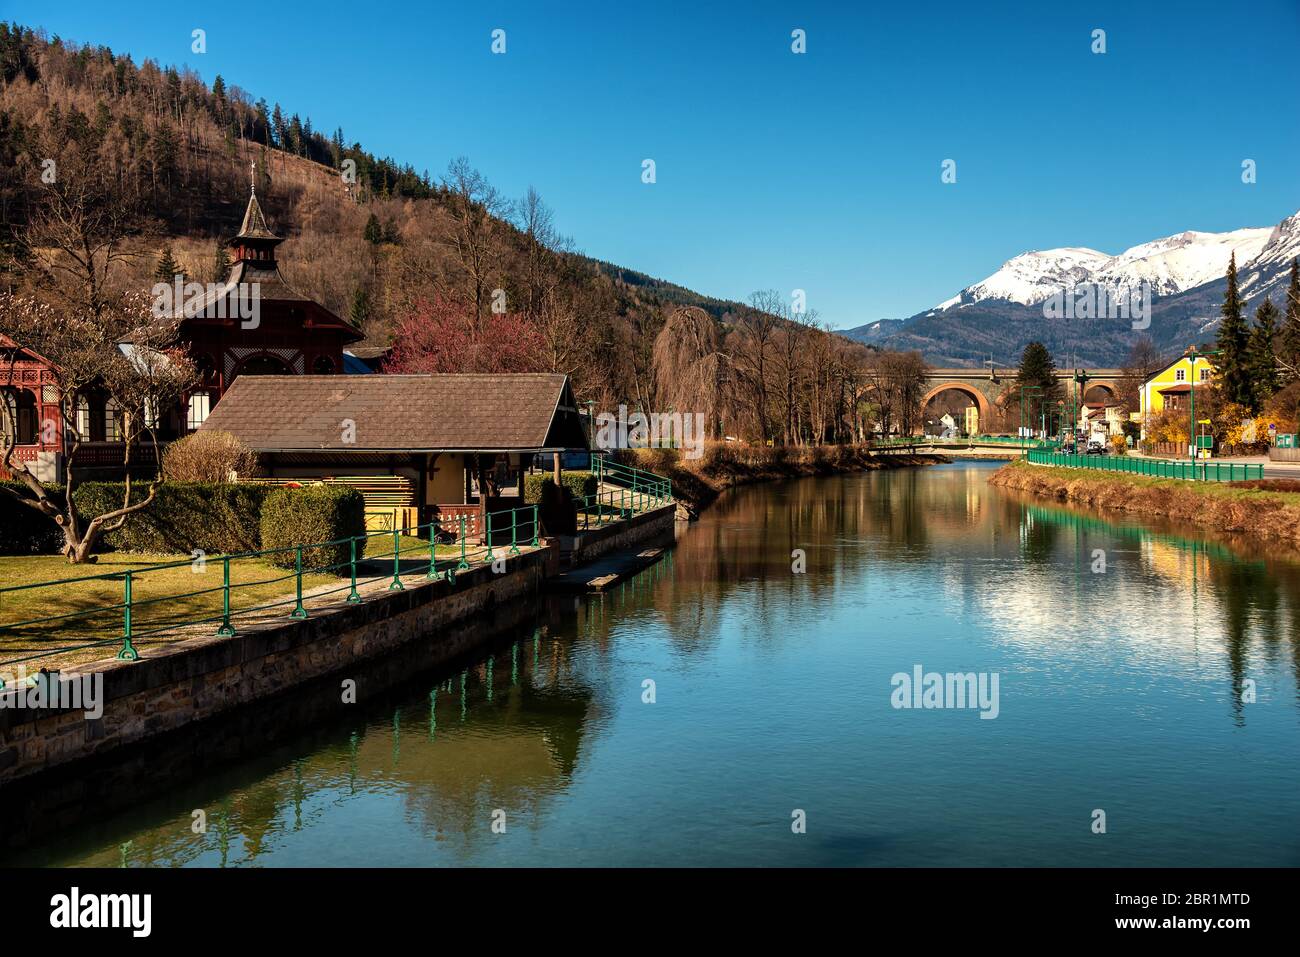 Panoramic view of the Village Payerbach with the river Schwarza and the Preiner Wand mountain Range in the background Stock Photo